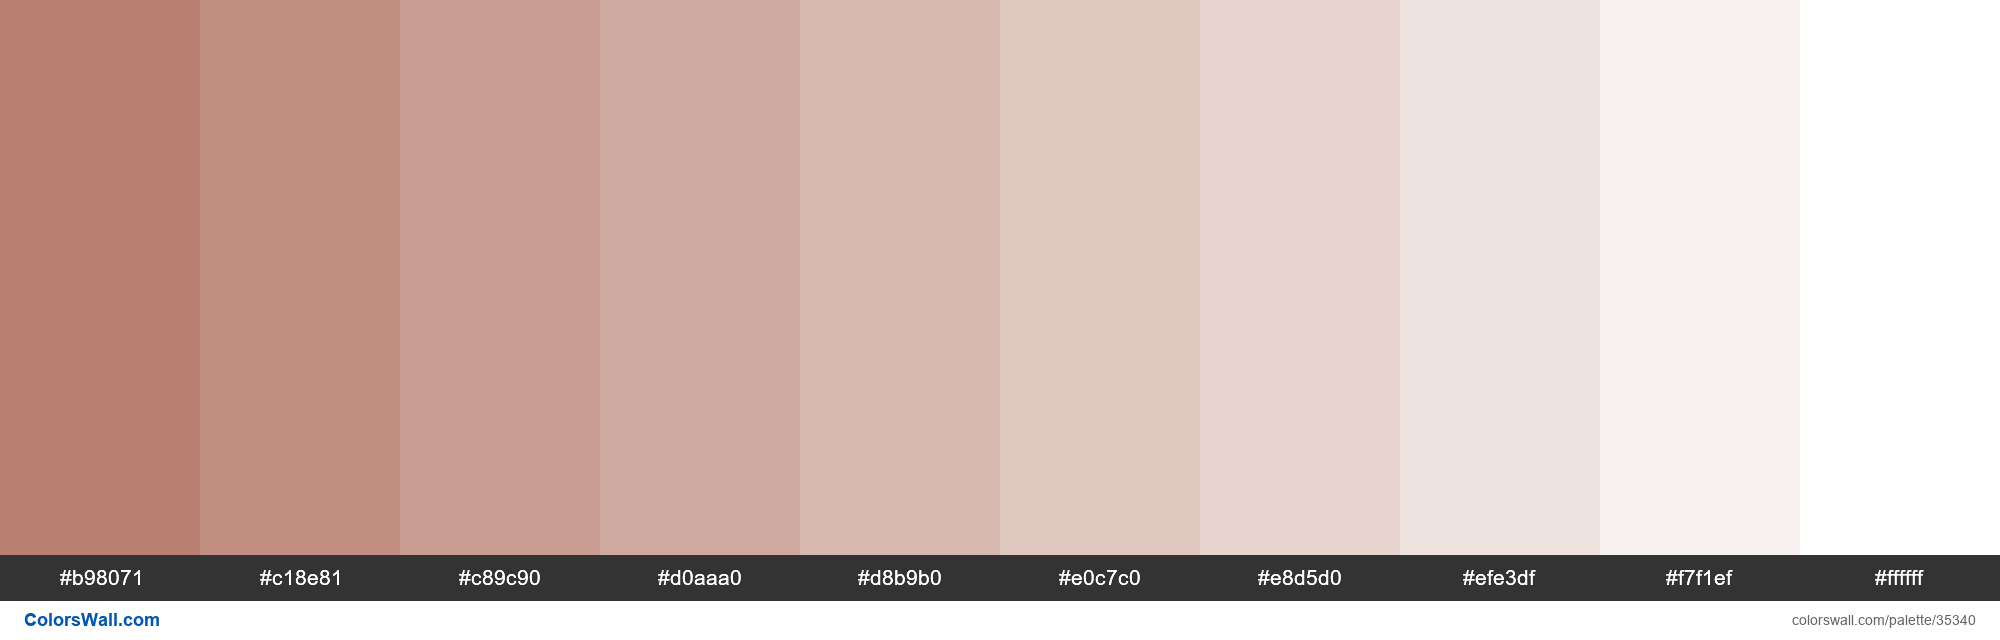 Tints Xkcd Color Pinkish Brown B Hex Colors Palette Colorswall